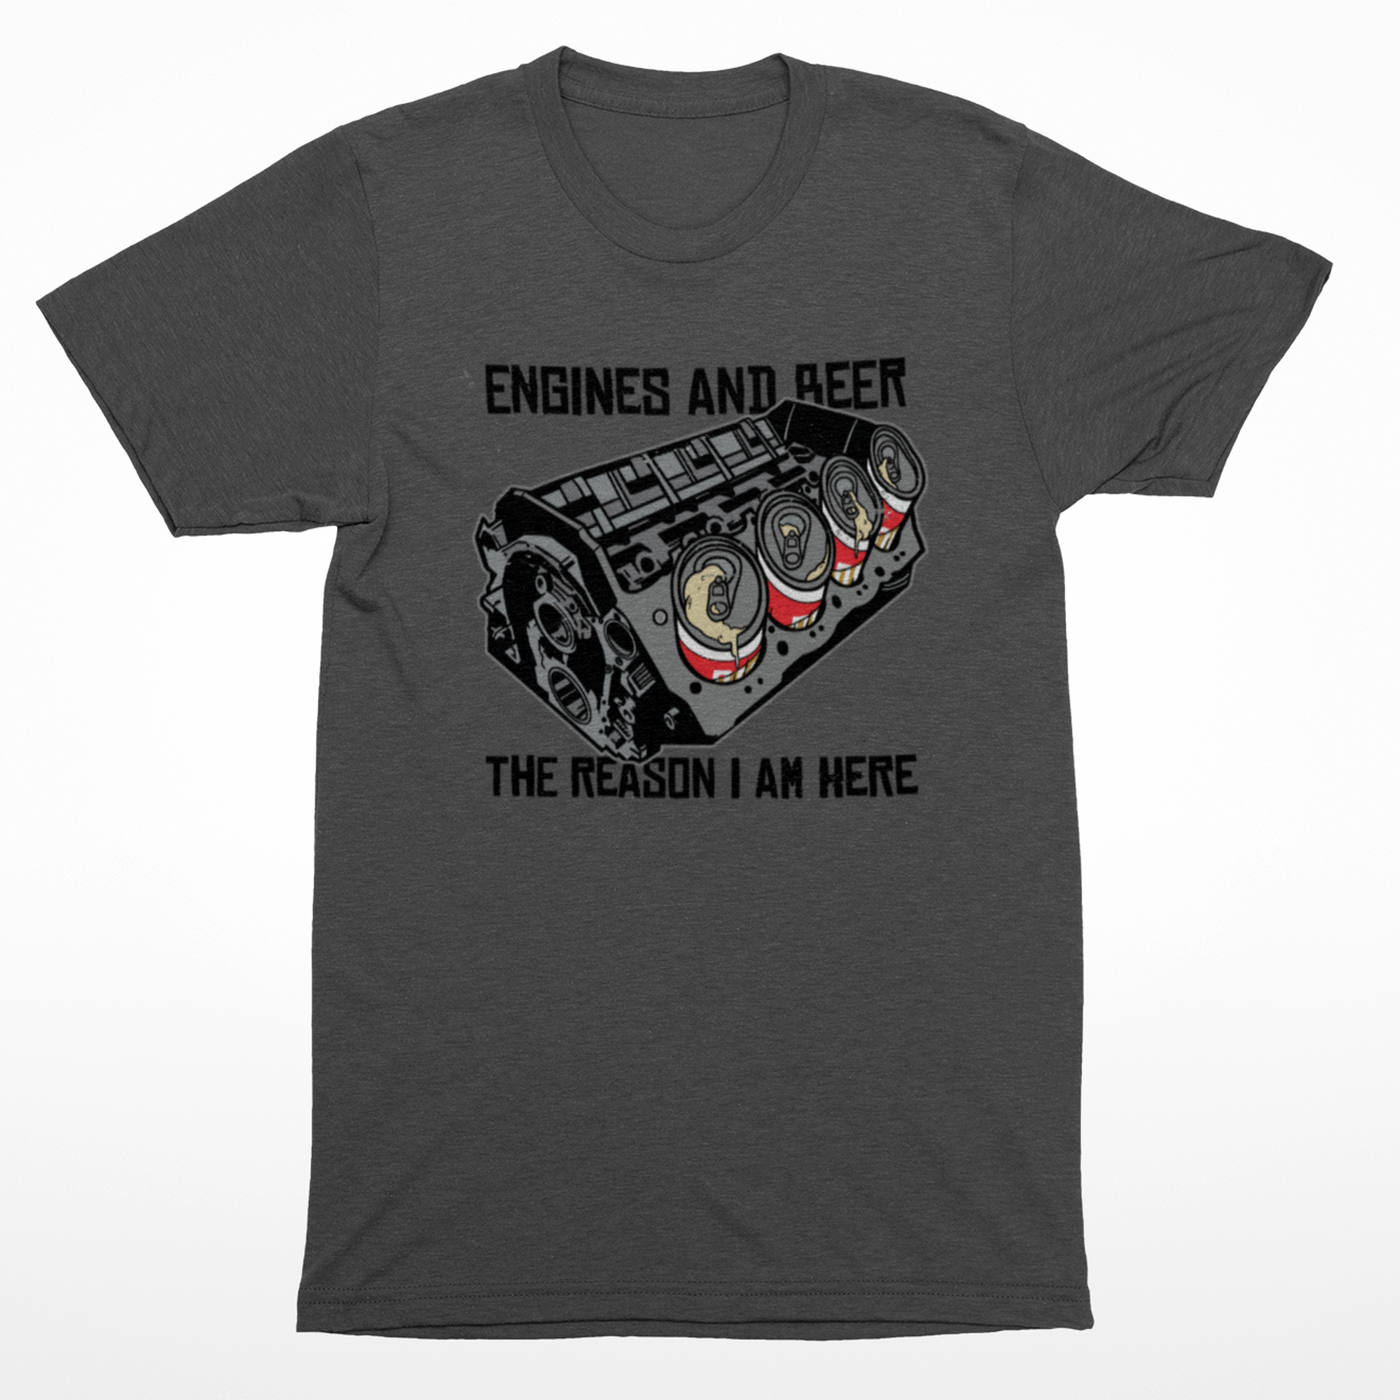 ENGINES AND BEER T-Shirt